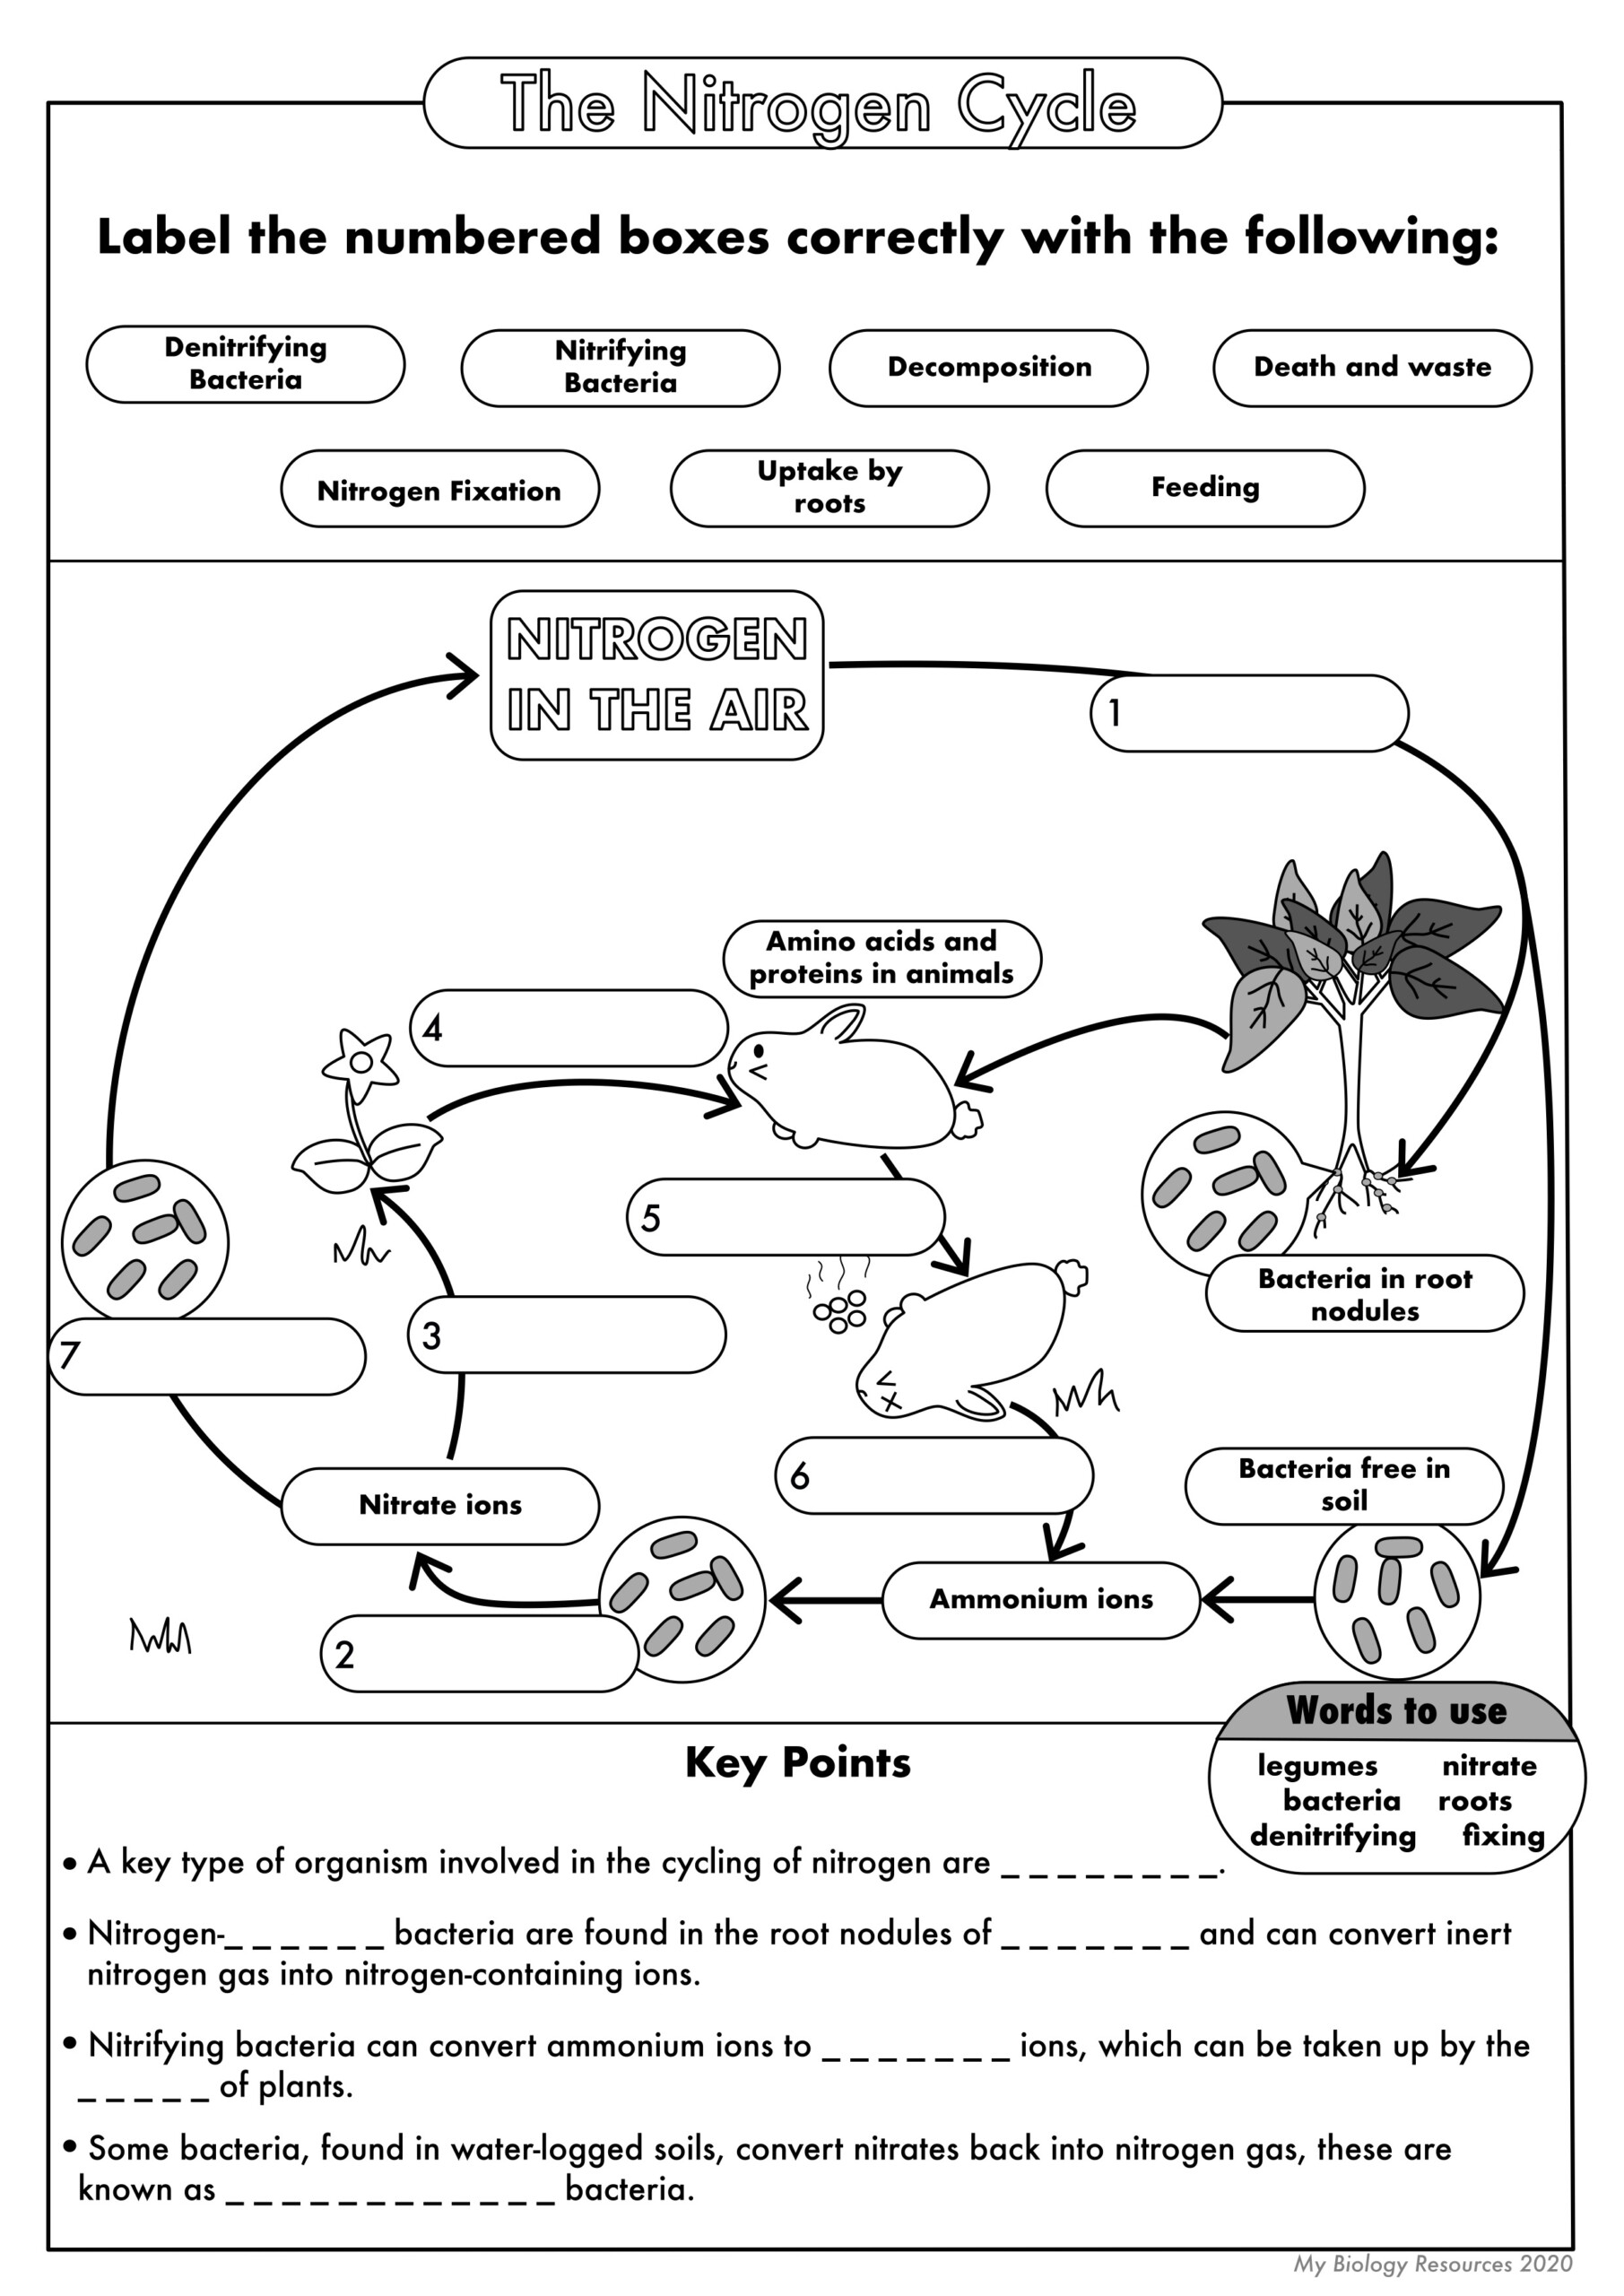 GCSE Biology The Nitrogen Cycle Teaching Resources